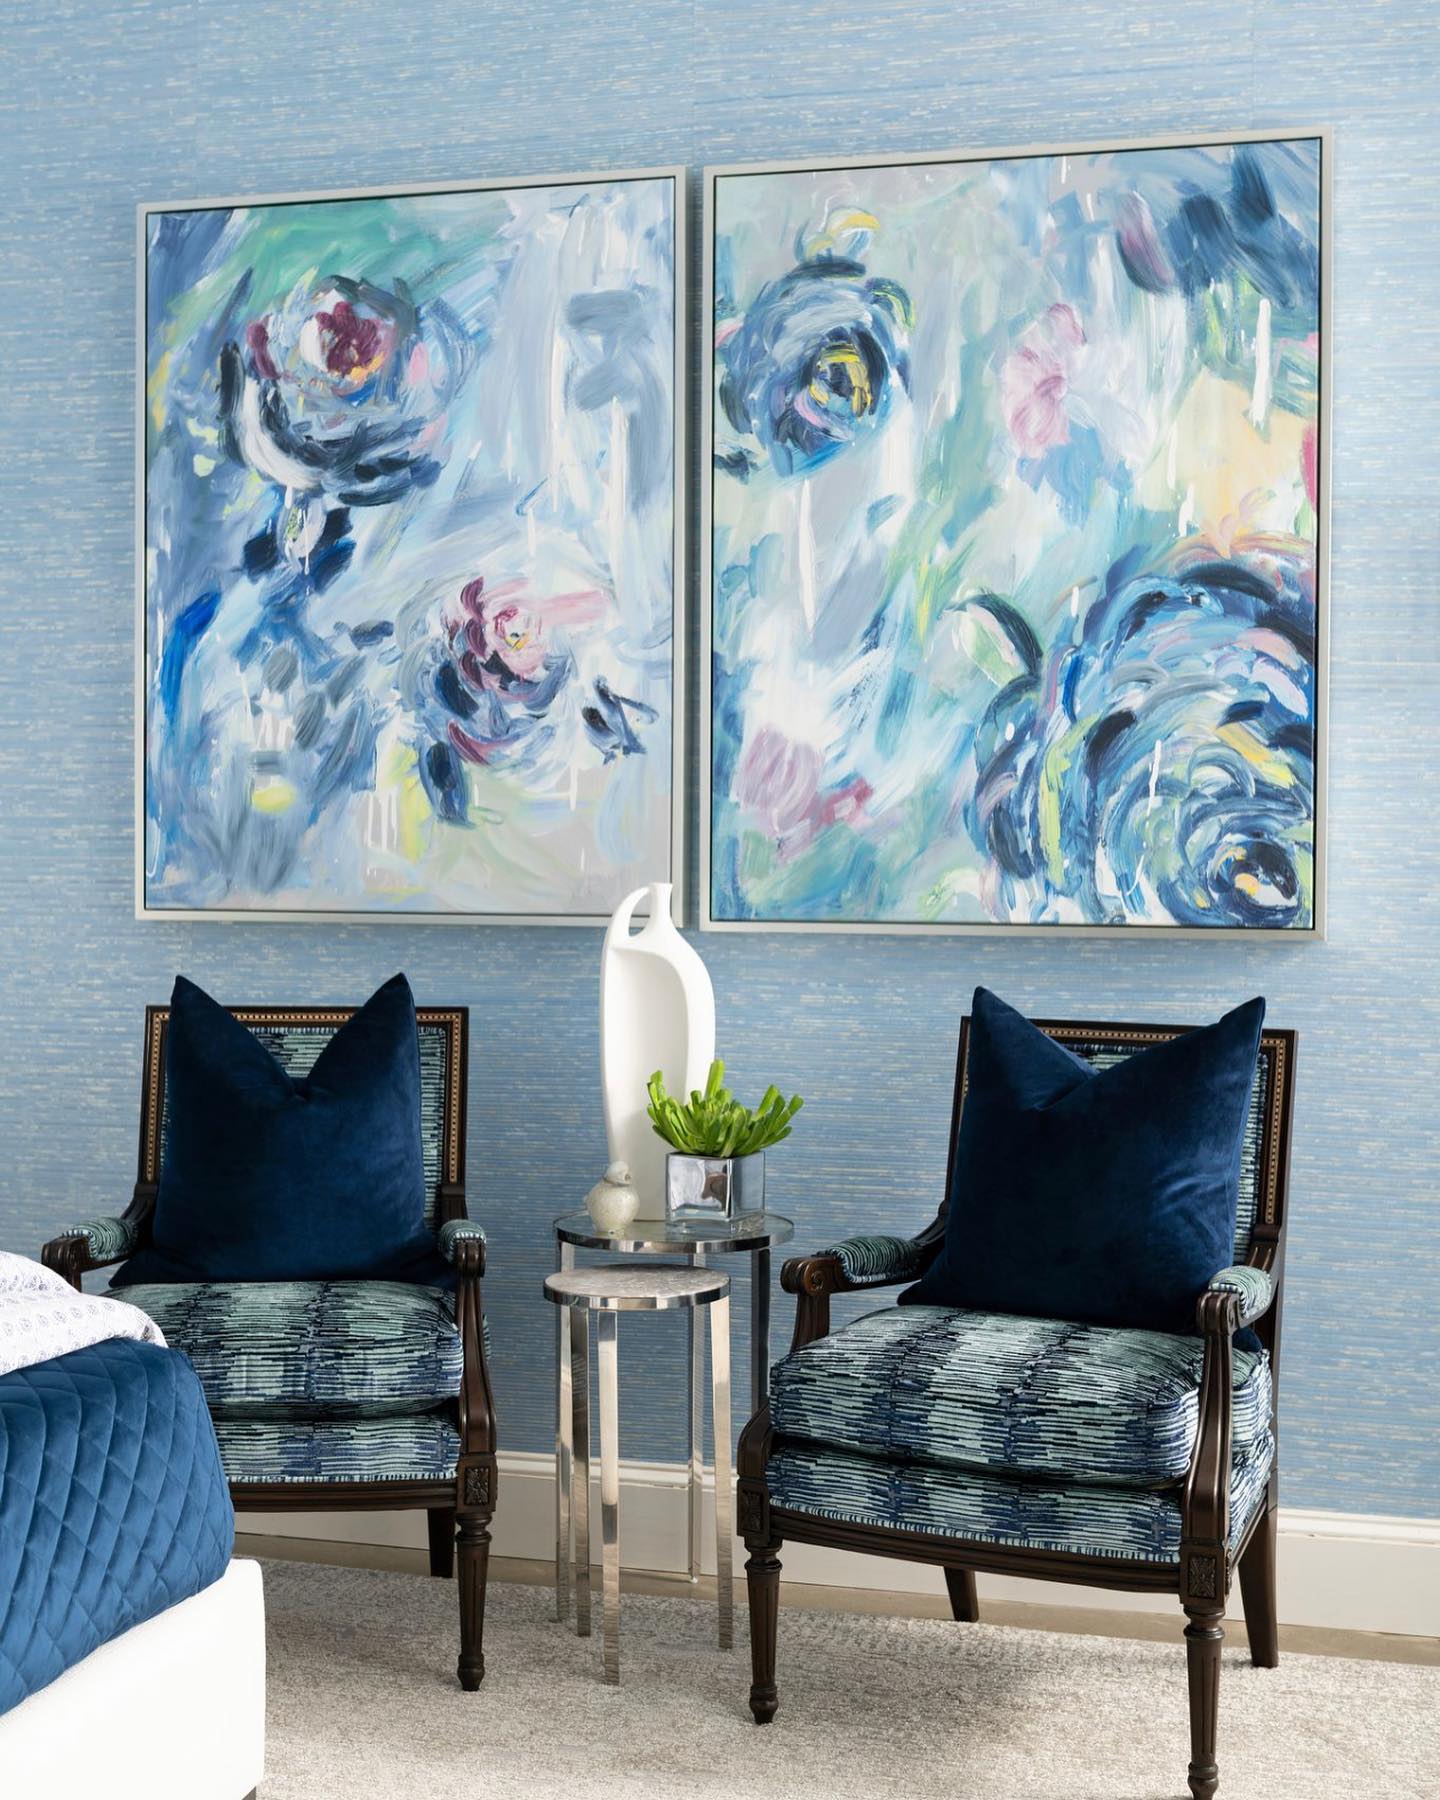 Fabulous art can be a jumping off point for a room’s design or the final touch that brings the room together. We love how this diptych layers in color and adds depth to this bedroom design by #ibbdesigner Karen Holloway. #interiordesign #Dallasdesign #roomswelove #bedroomdesign #blueinteriors #teamIBB #ibbdesign